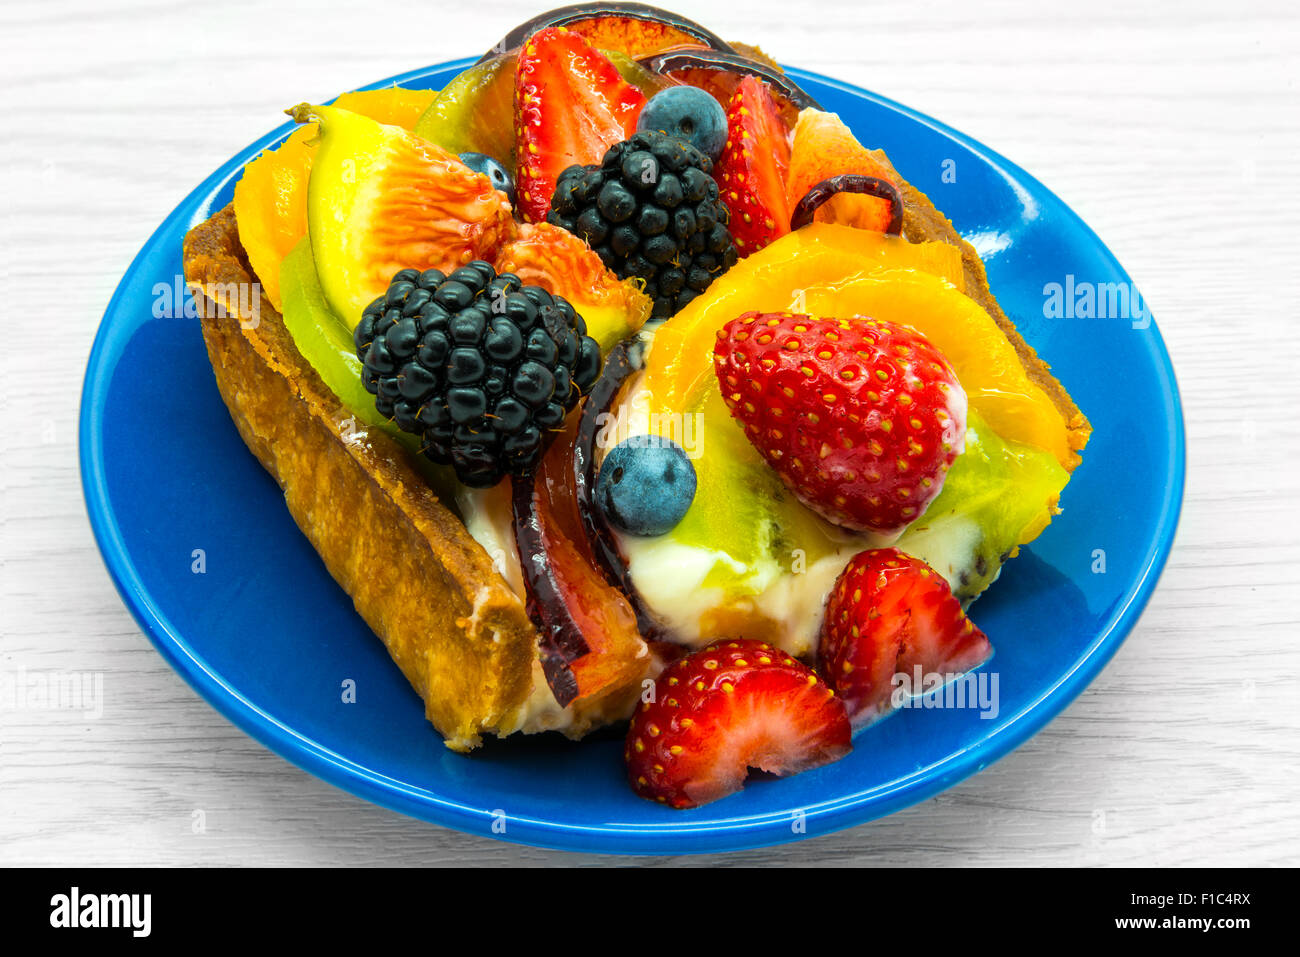 Piece of fruit cake on a blue plate. Stock Photo